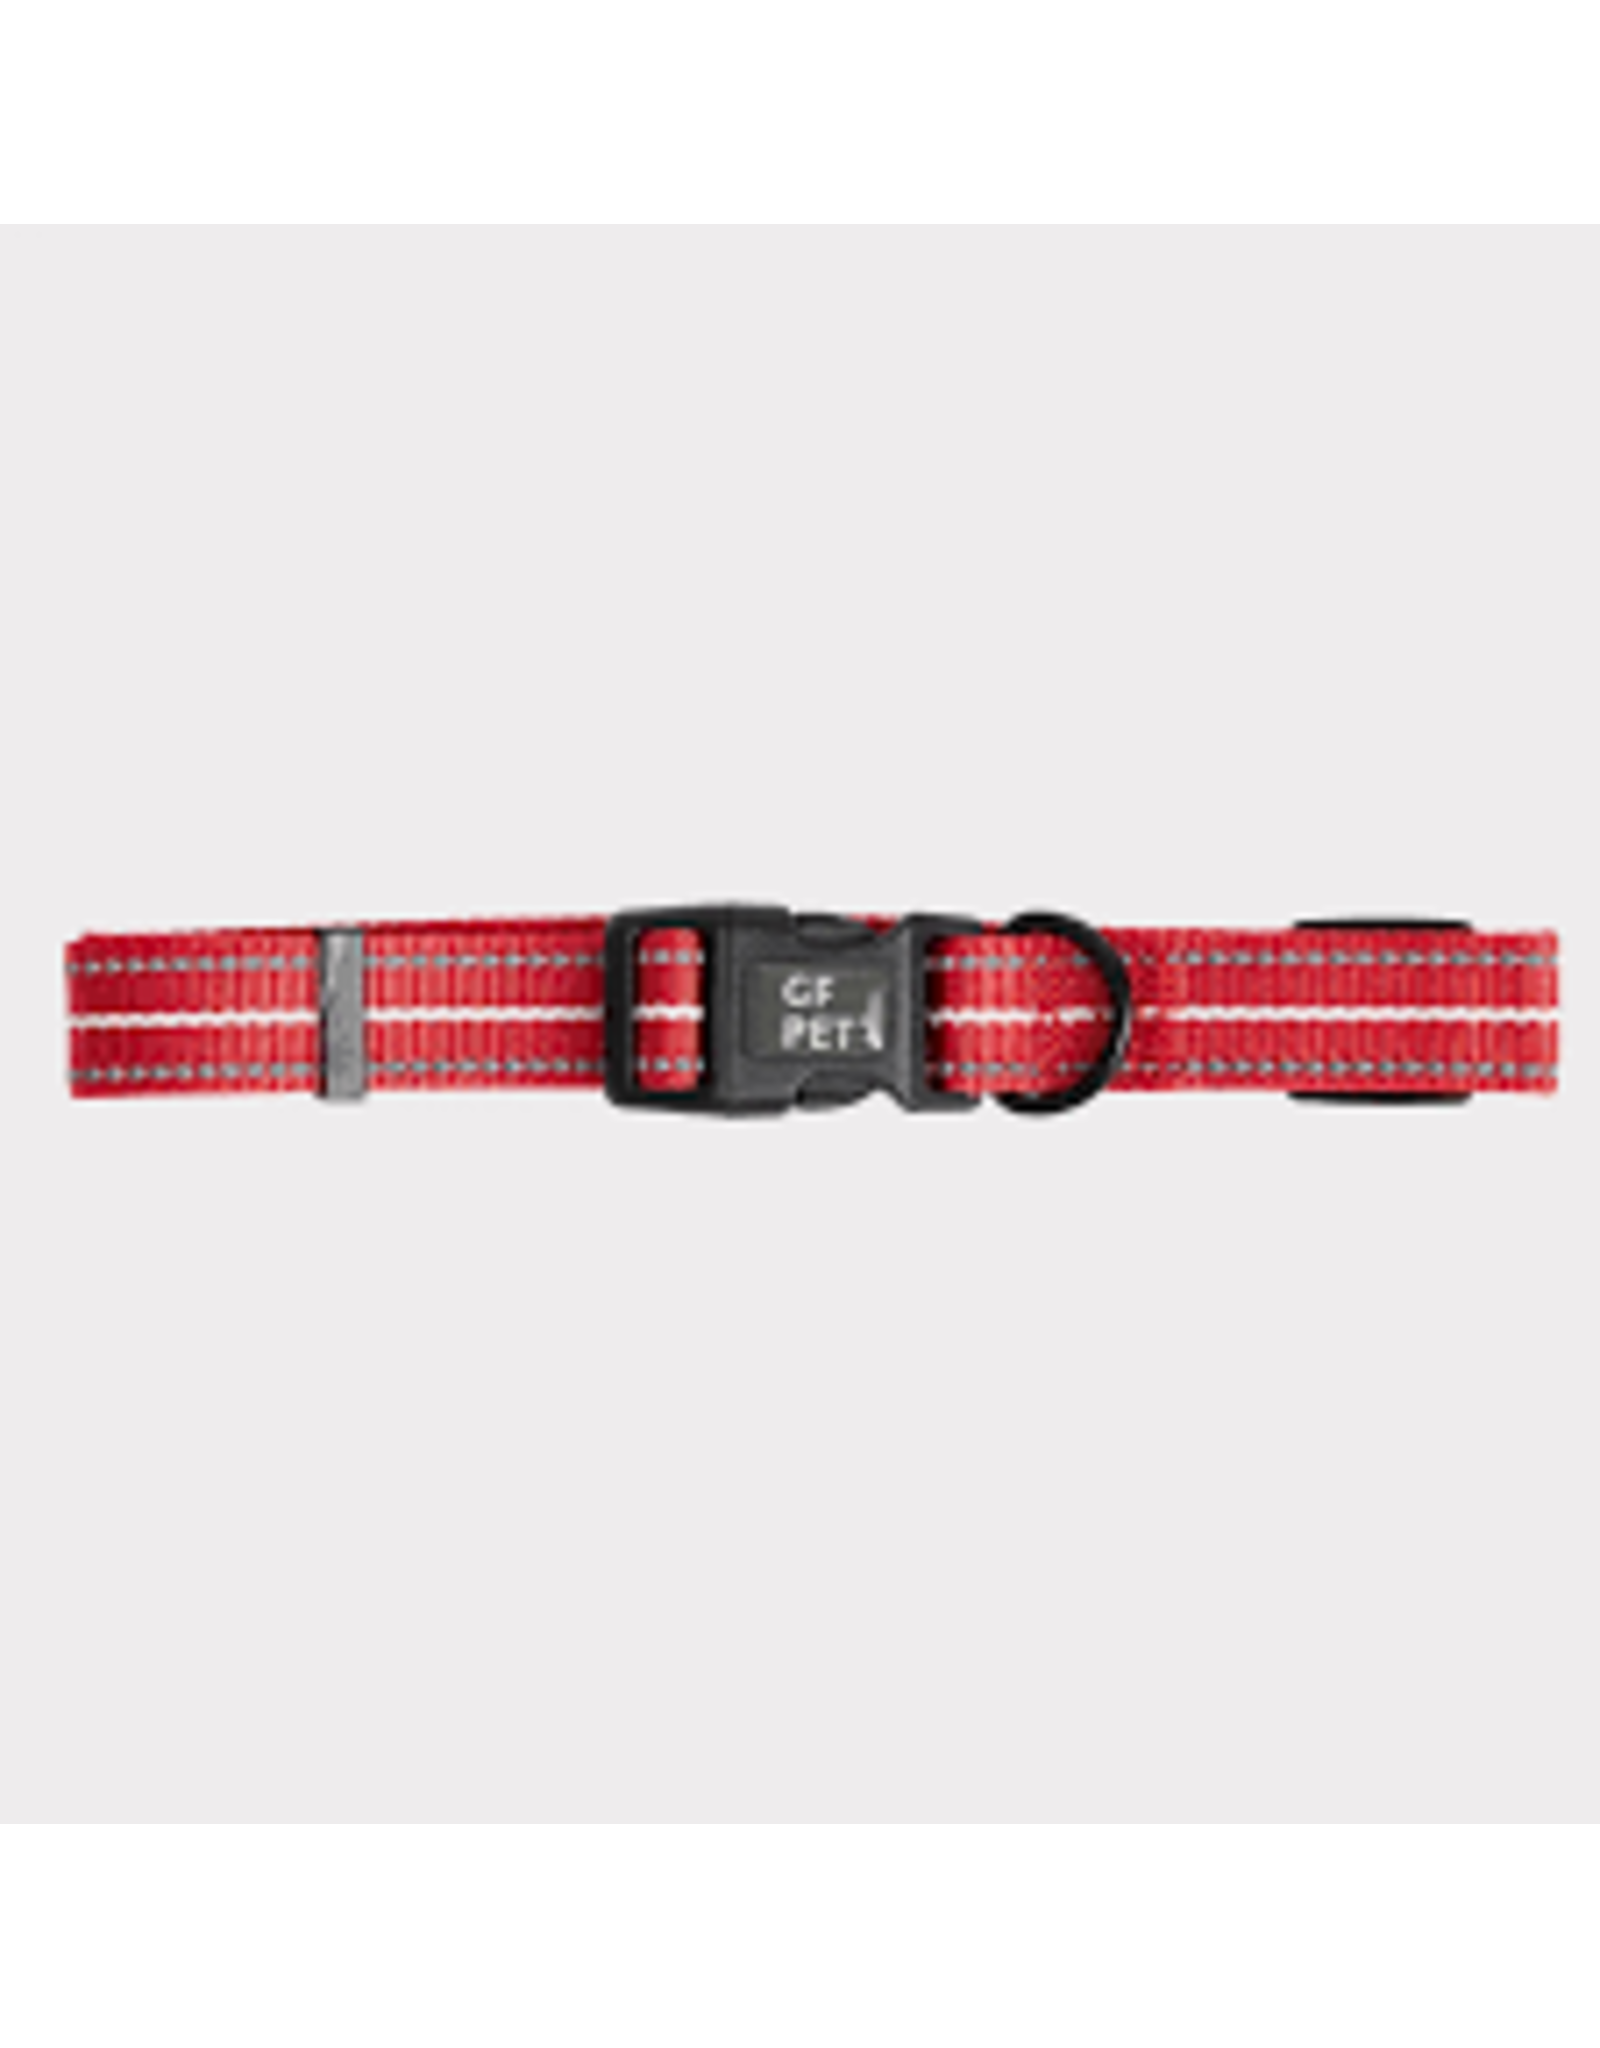 GF Reflective Collar - 5/8" W, 9-13"  - Red - GL434S1-RD-S - SMALL